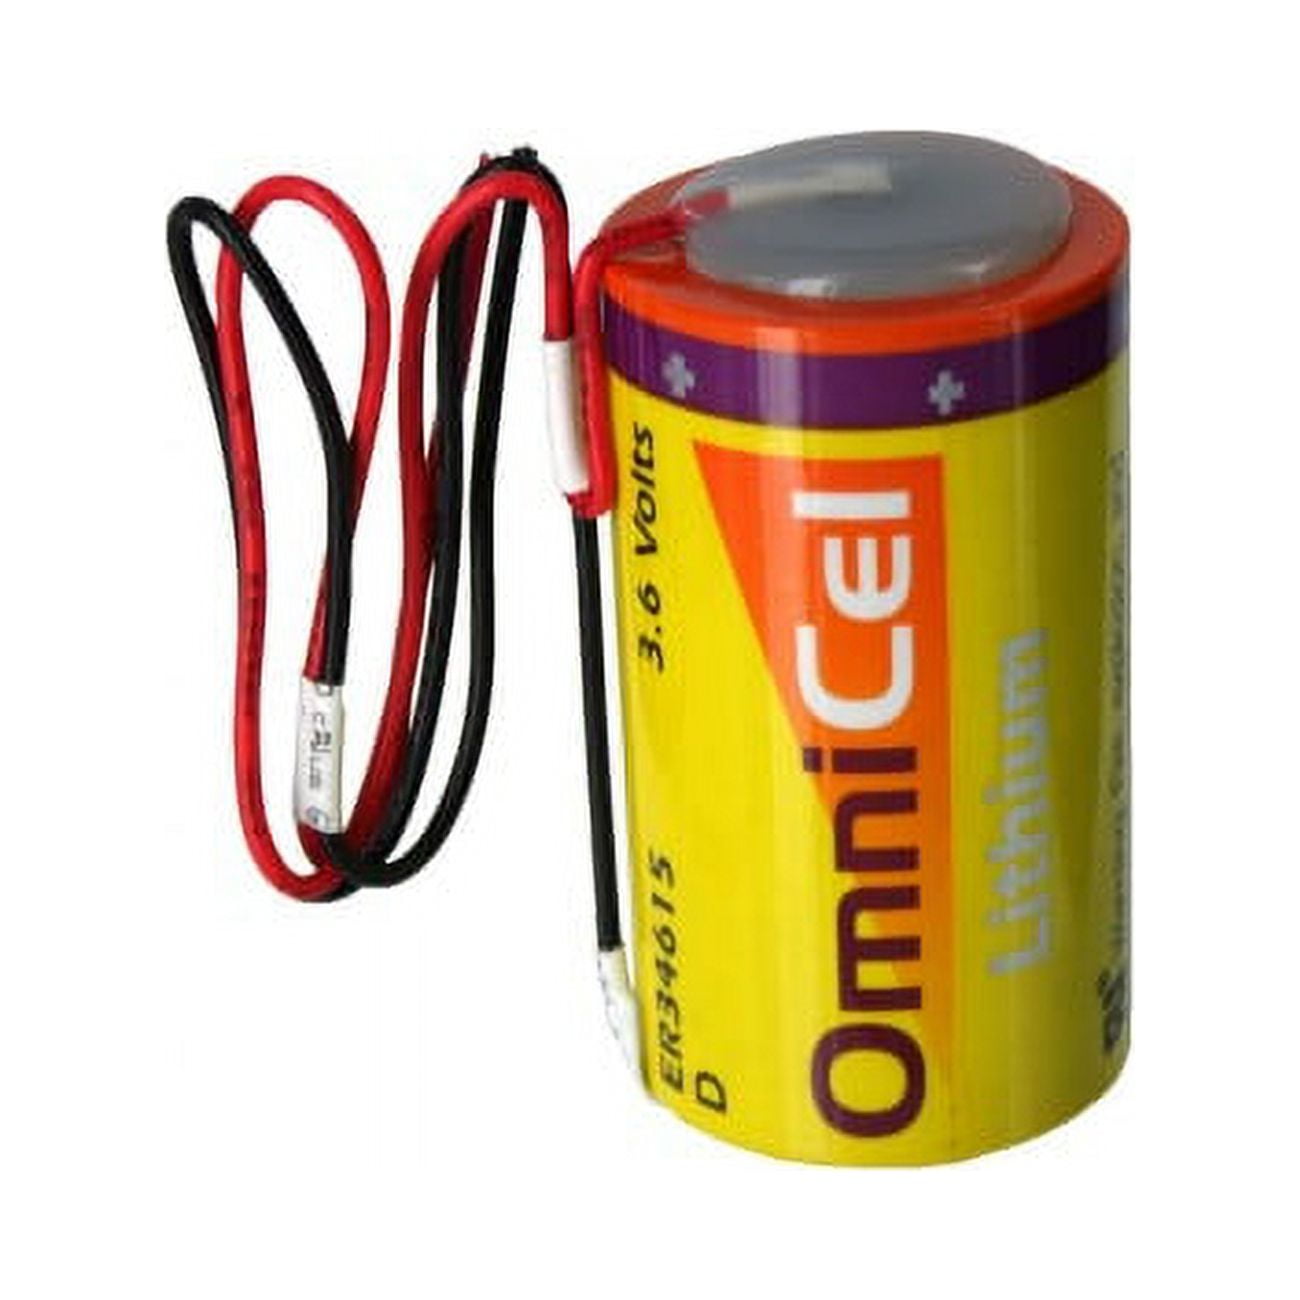 Tenergy Li-ion 14500 Cylindrical 3.6V 800mAh Flat Top Rechargeable Battery  - UL Listed